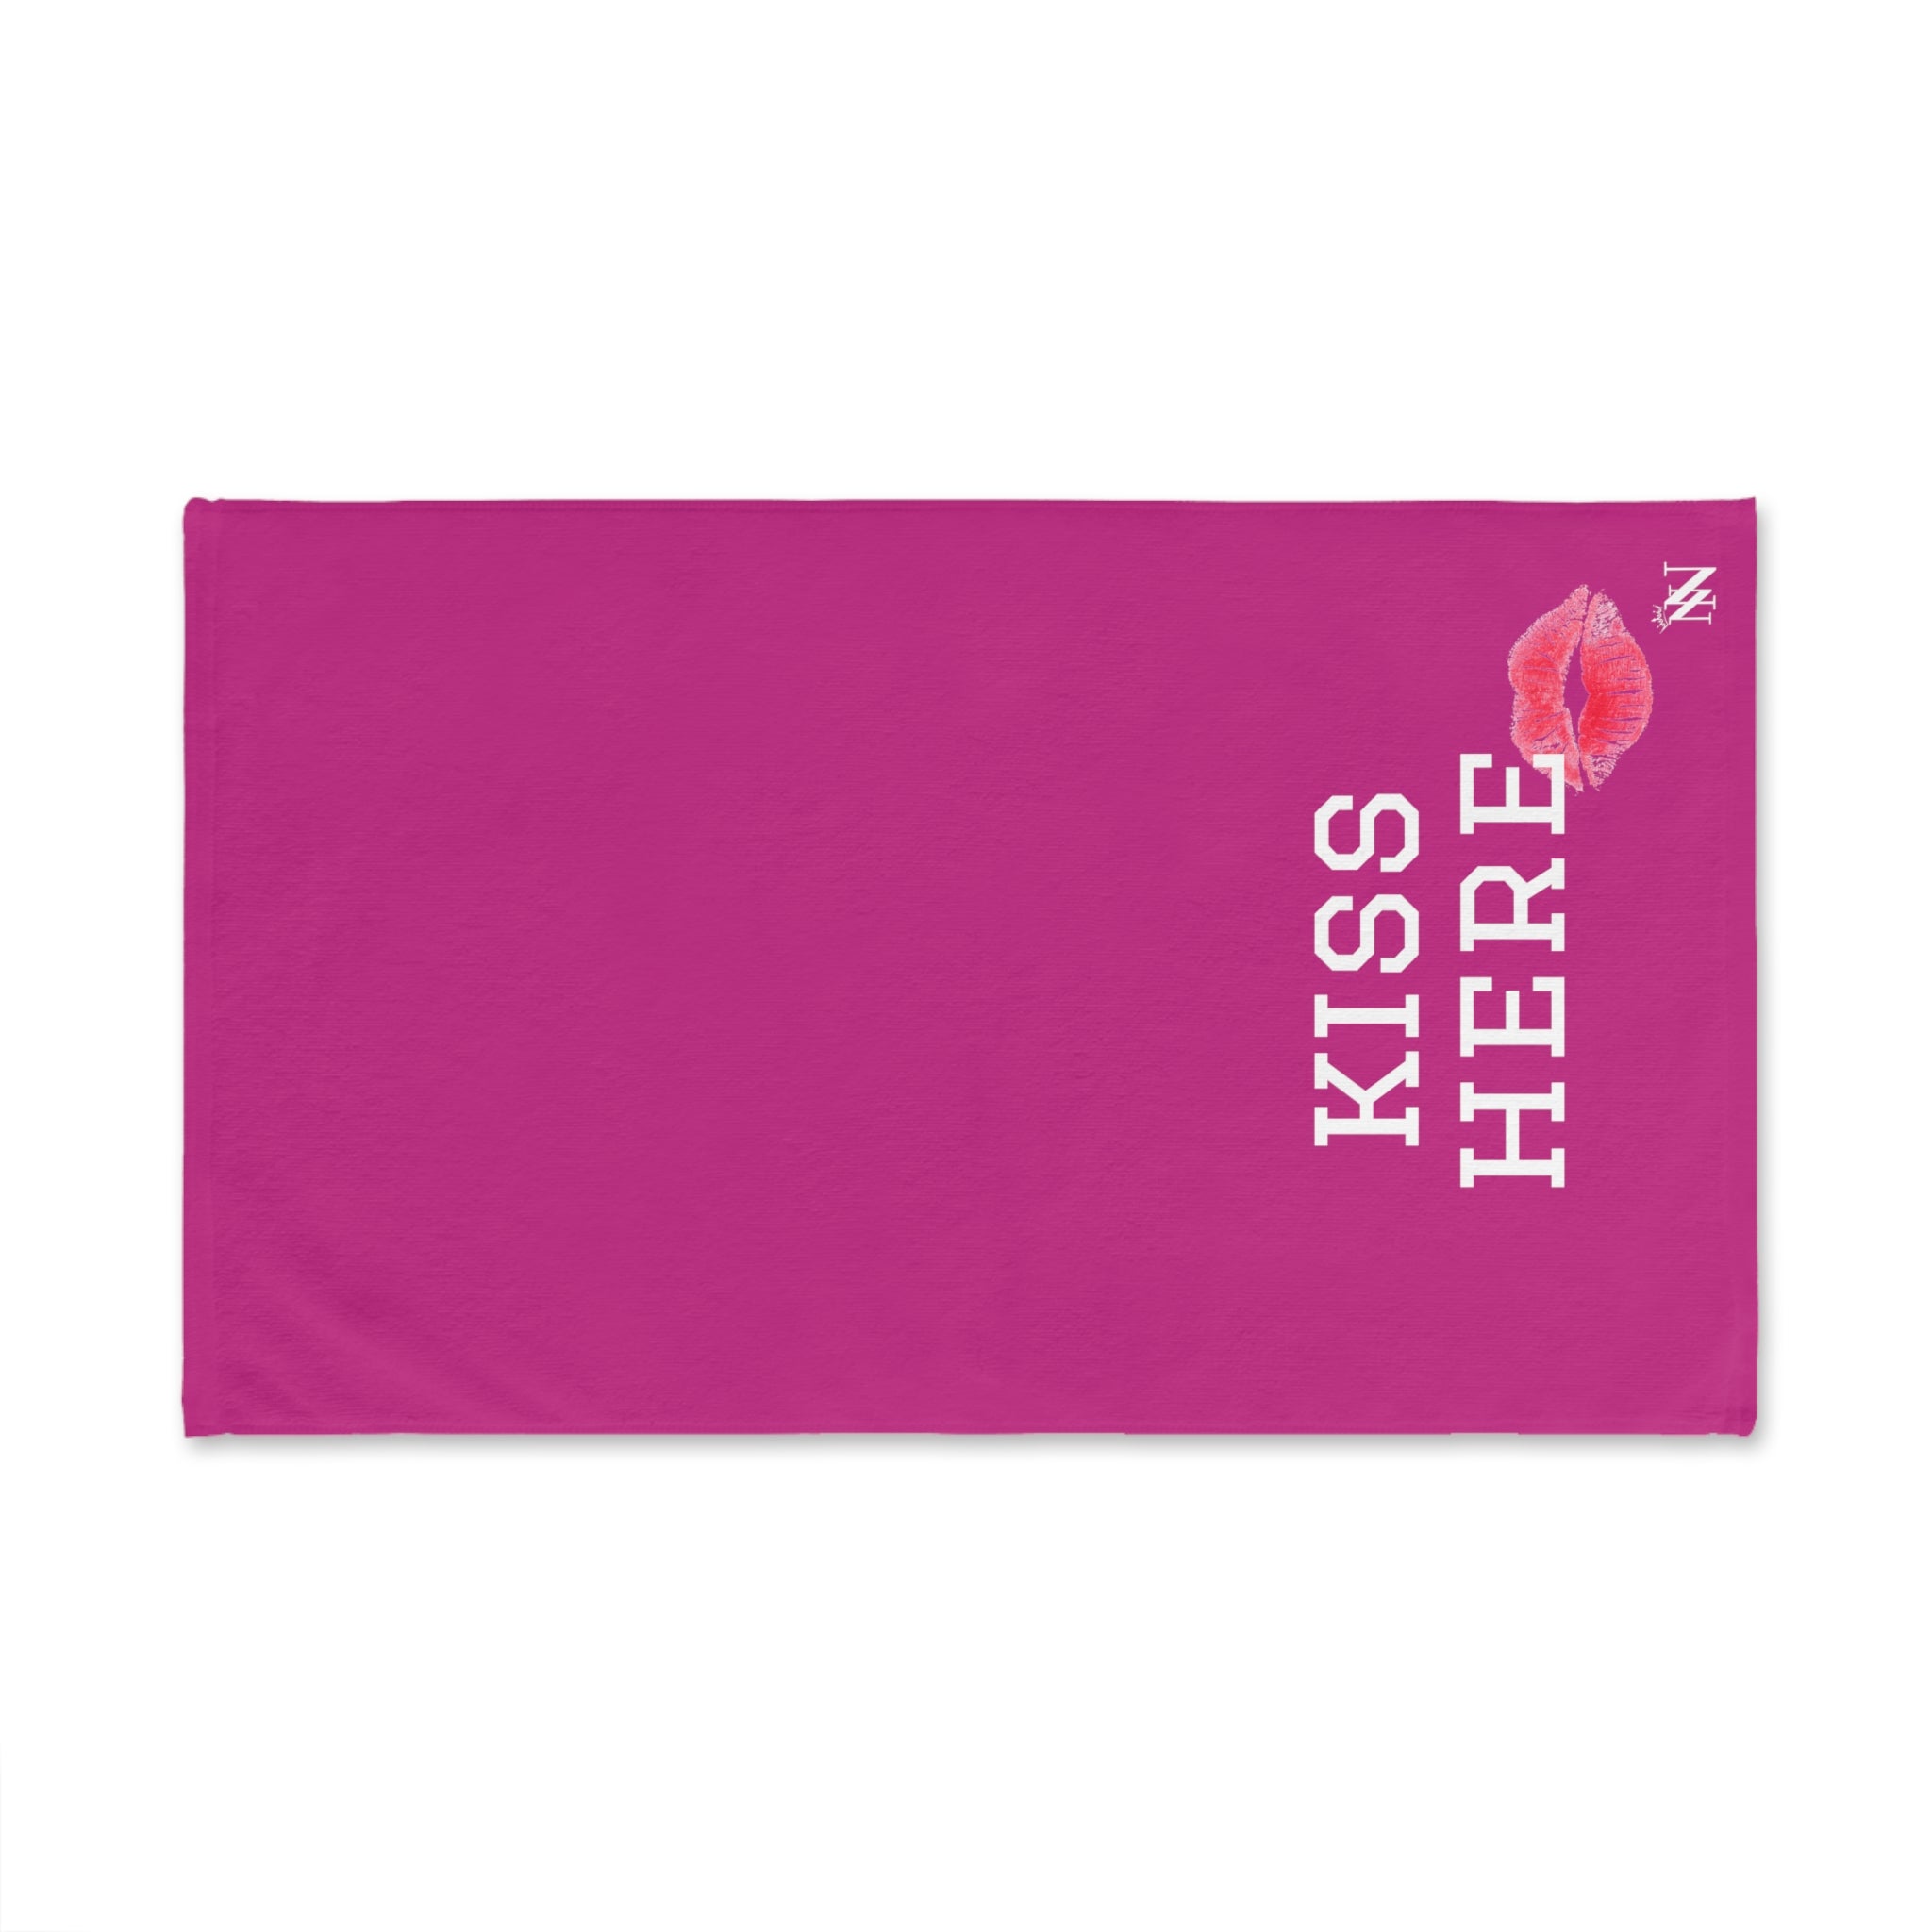 Kiss Here LipsFuscia | Funny Gifts for Men - Gifts for Him - Birthday Gifts for Men, Him, Husband, Boyfriend, New Couple Gifts, Fathers & Valentines Day Gifts, Hand Towels NECTAR NAPKINS